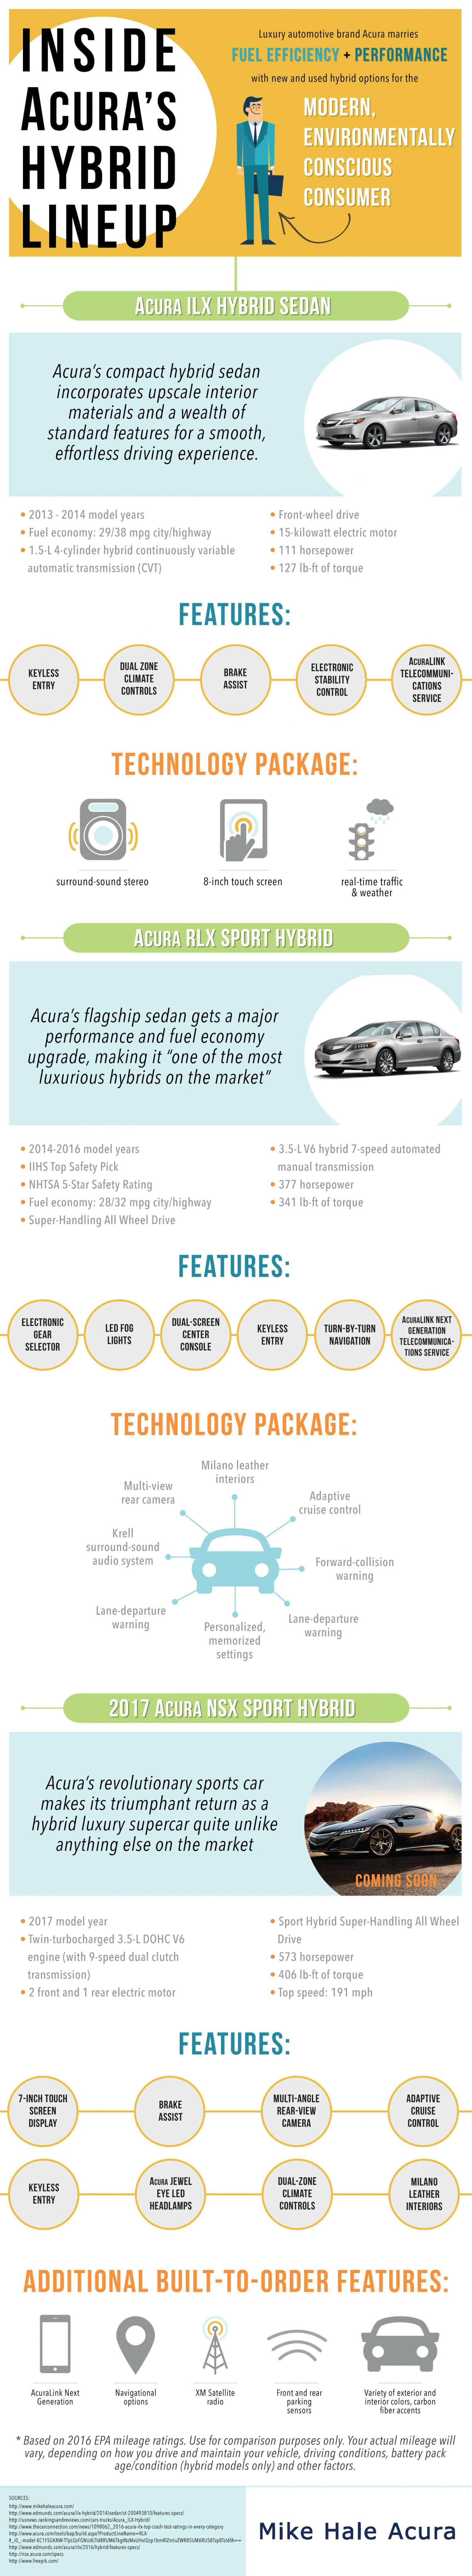 Inside Acura's Hybrid Lineup Infographic